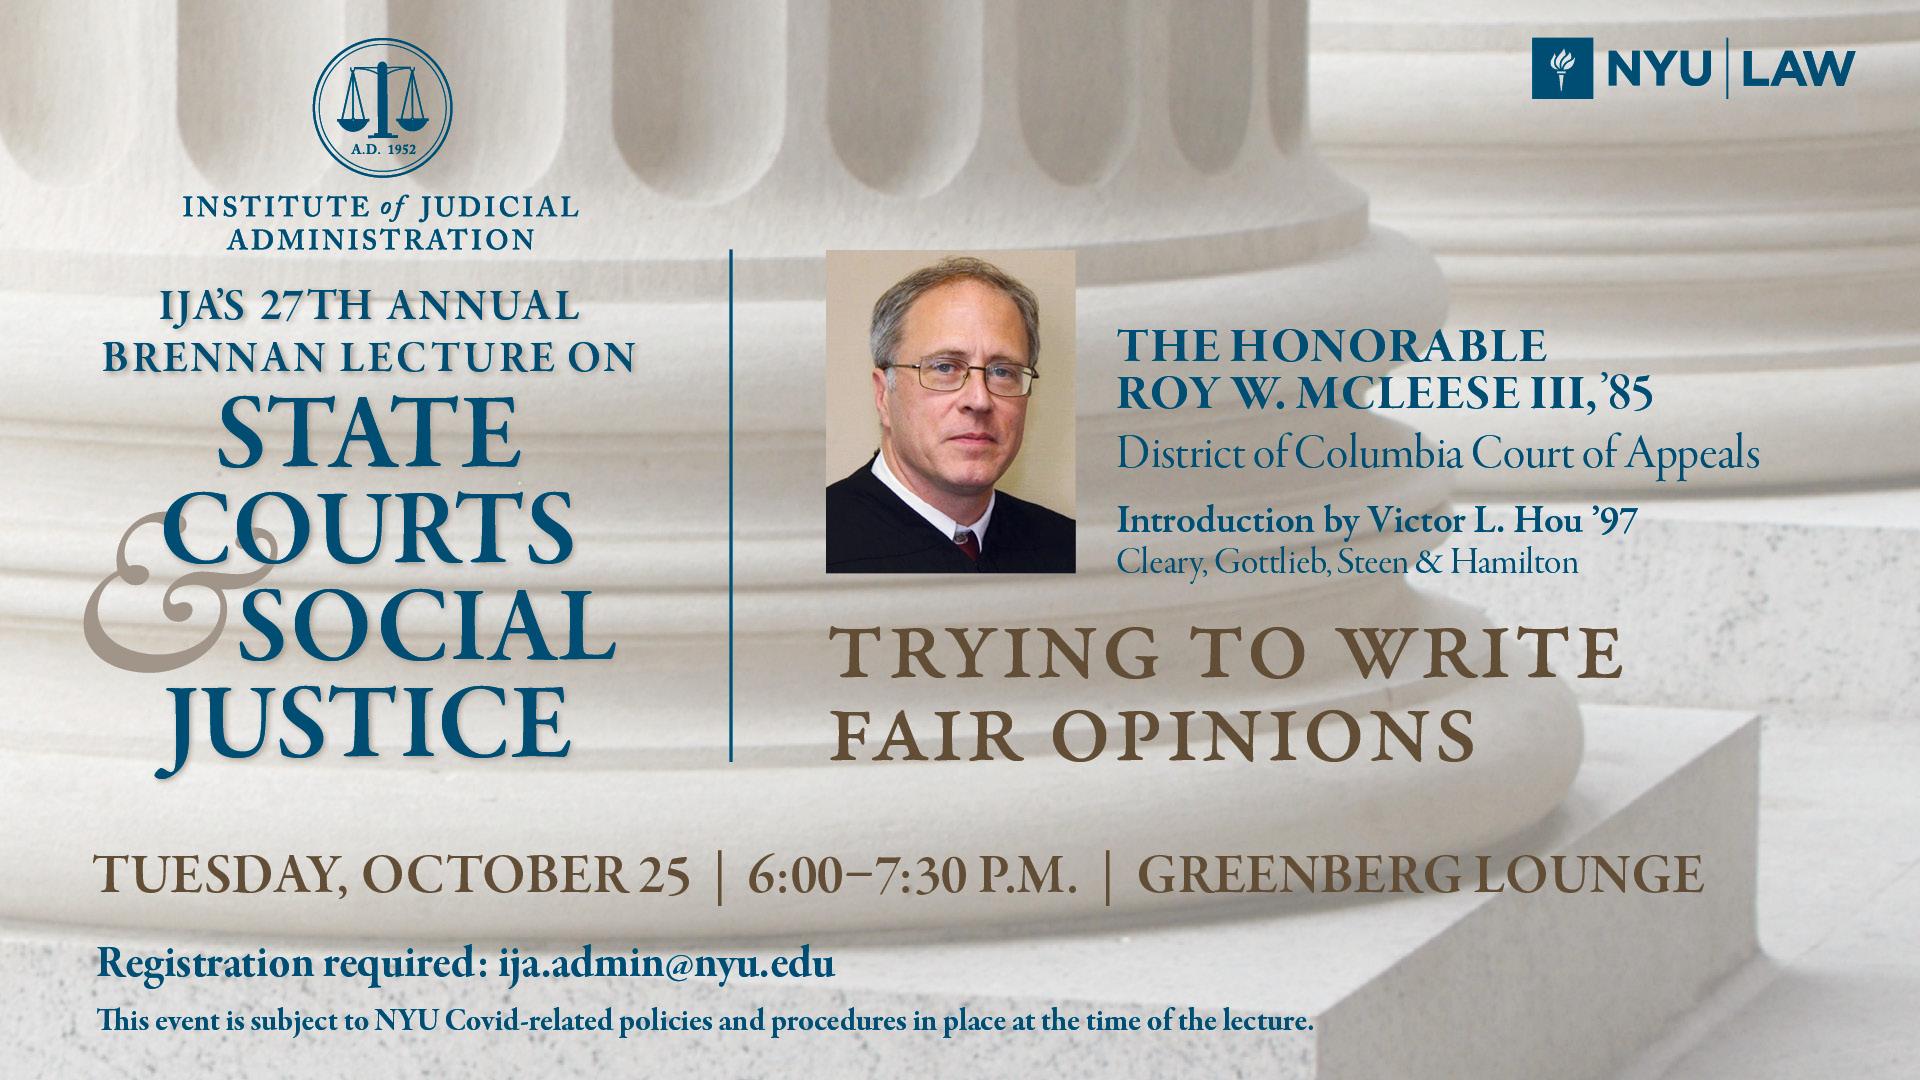 Banner design of the 27th Annual Brennan Lecture